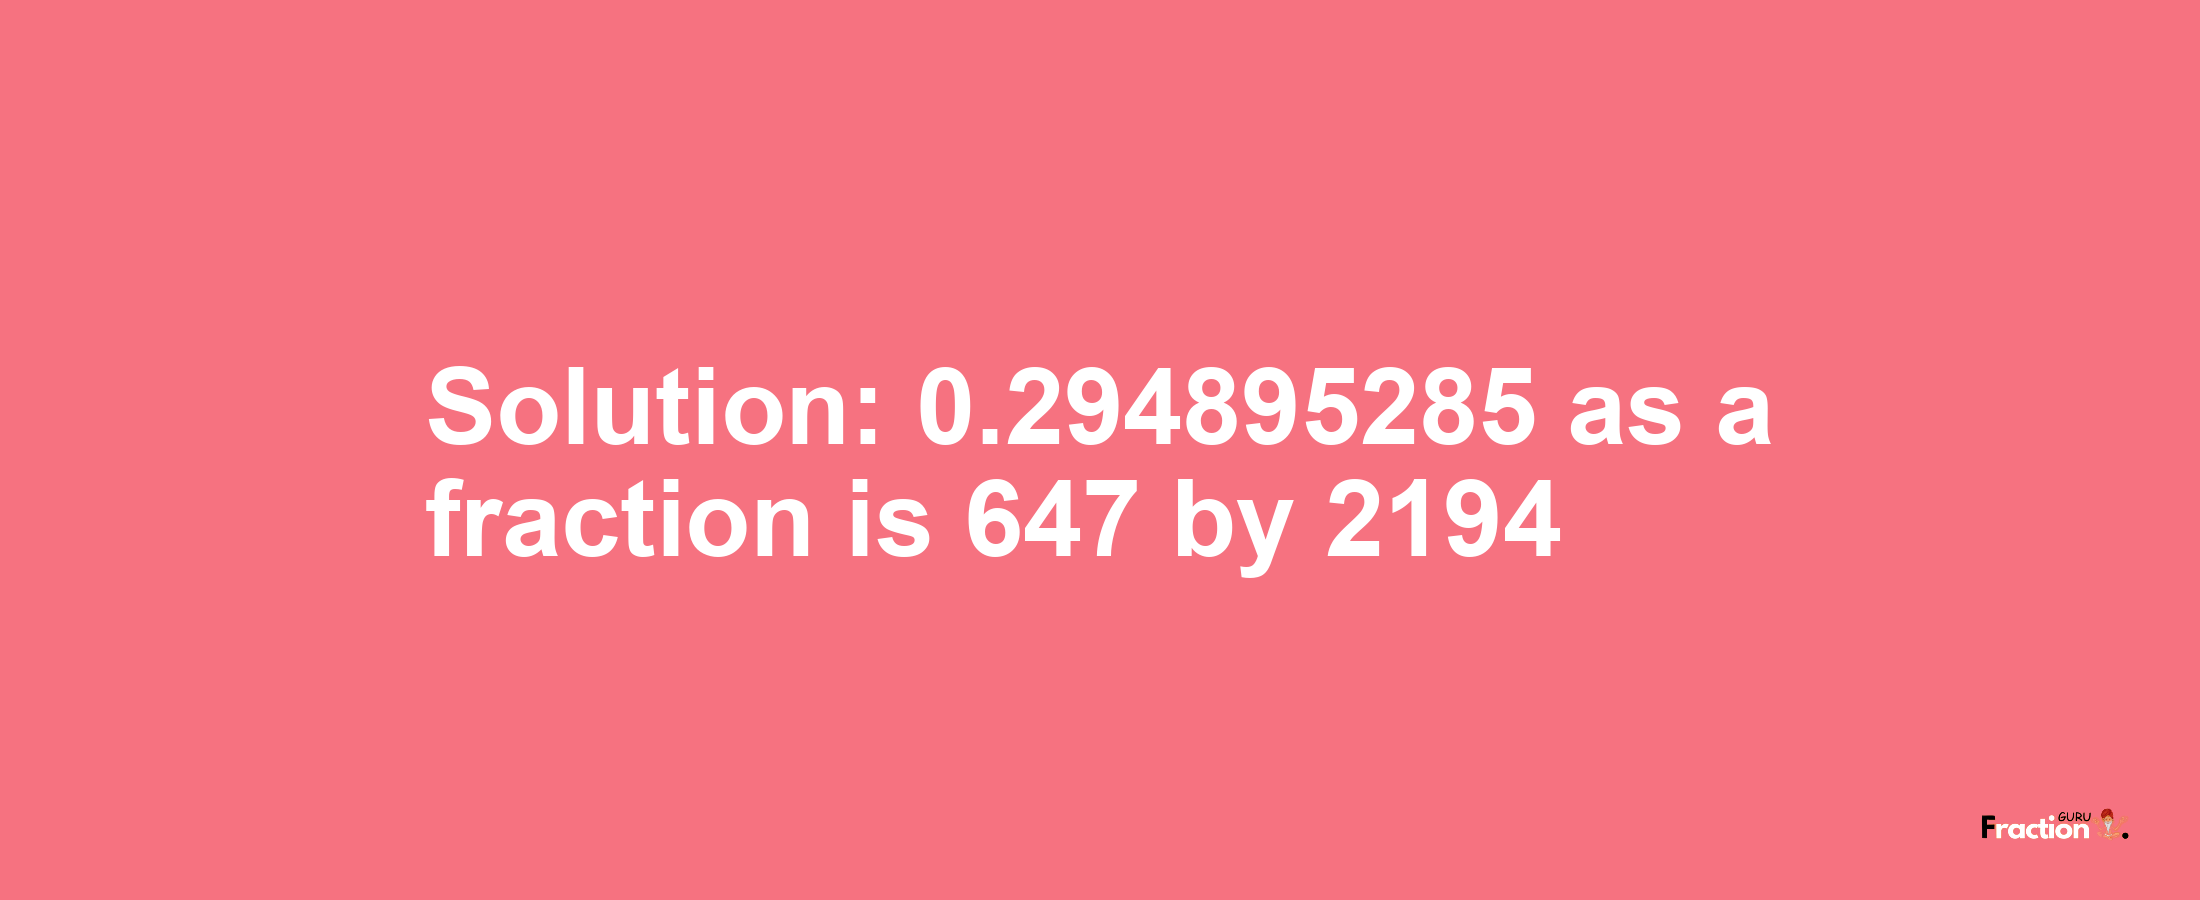 Solution:0.294895285 as a fraction is 647/2194